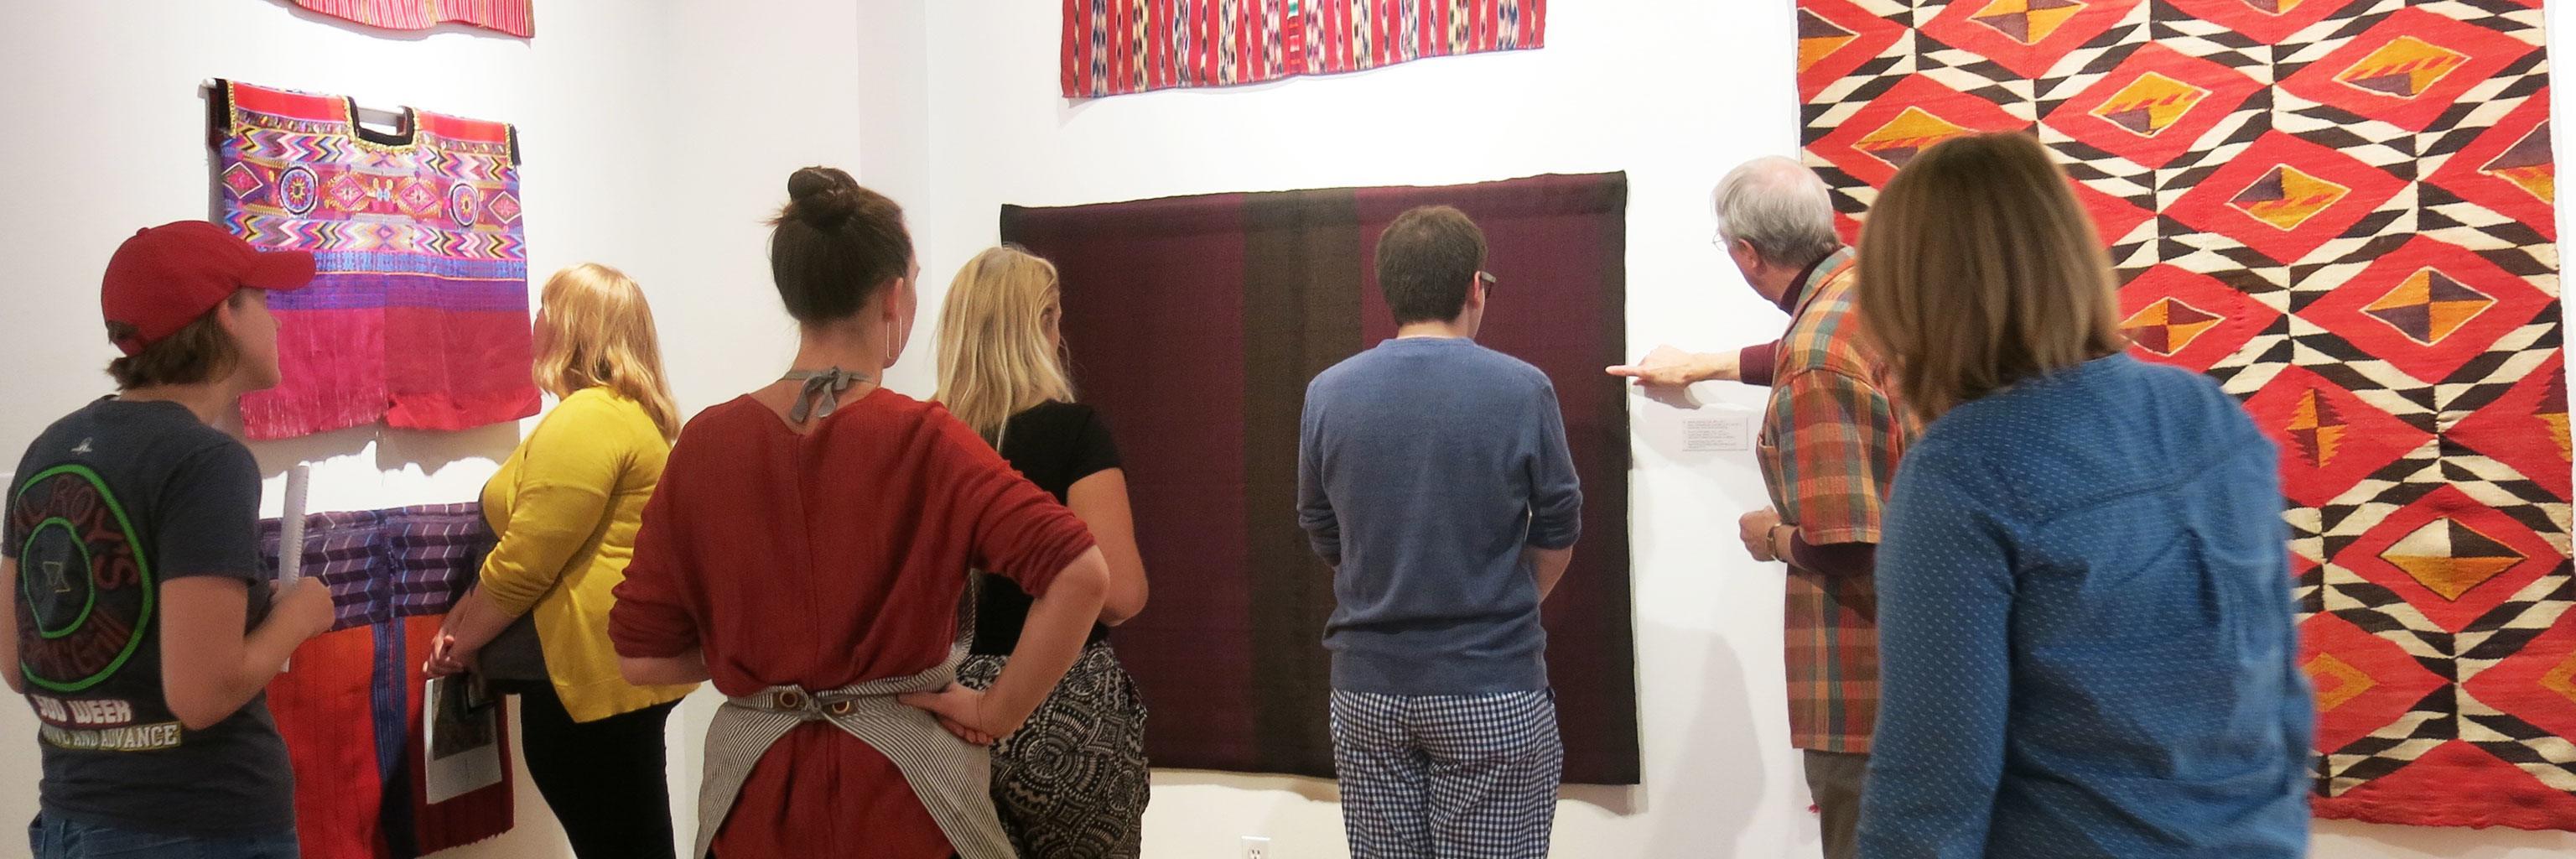 People stand looking at textiles on a wall.